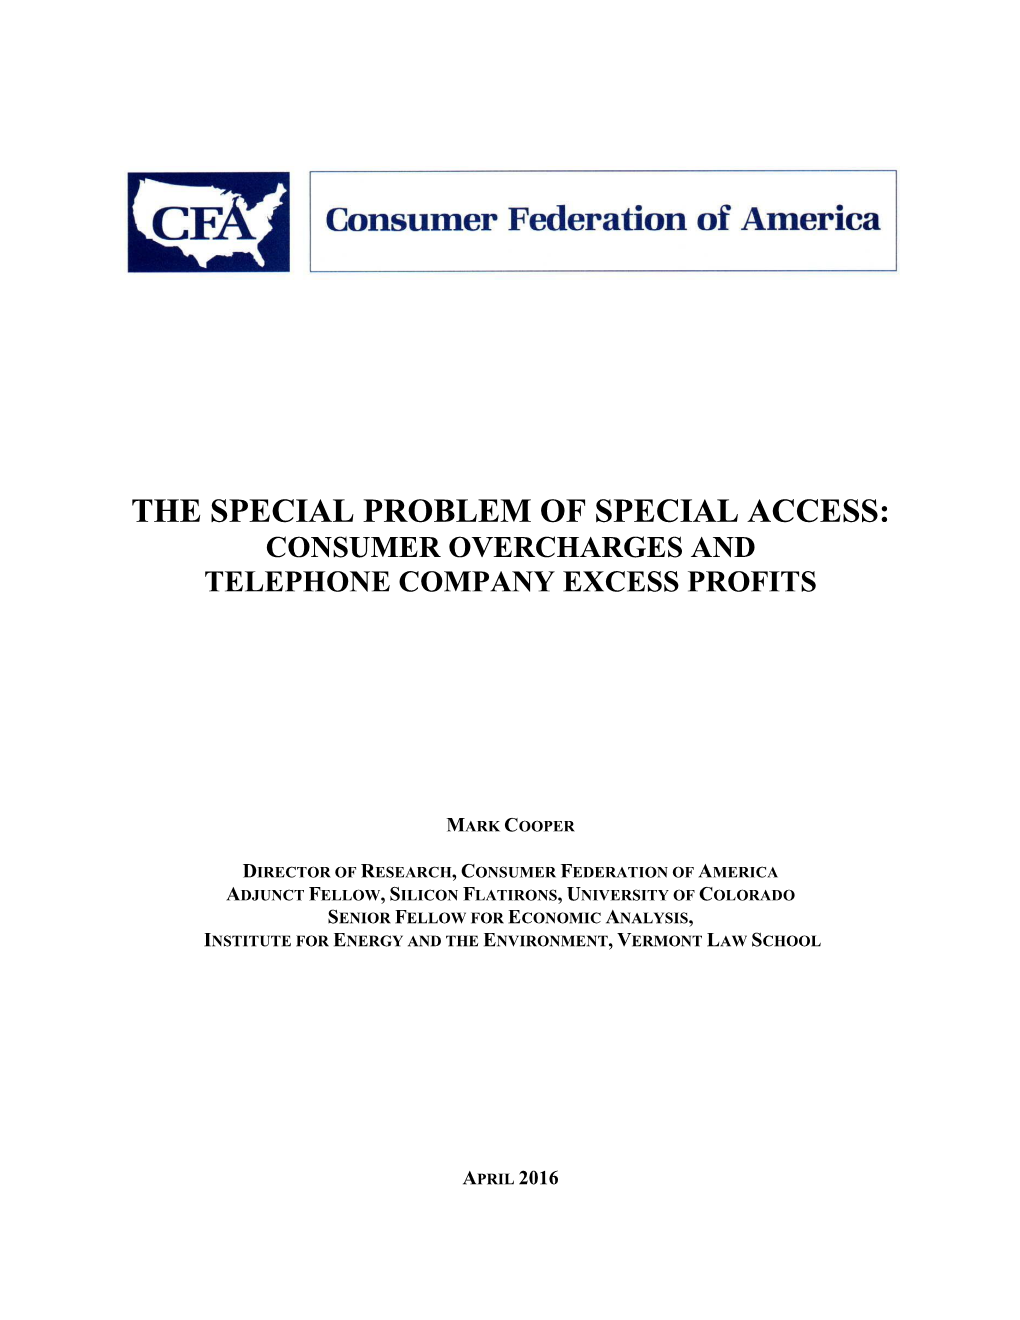 The Special Problem of Special Access: Consumer Overcharges and Telephone Company Excess Profits